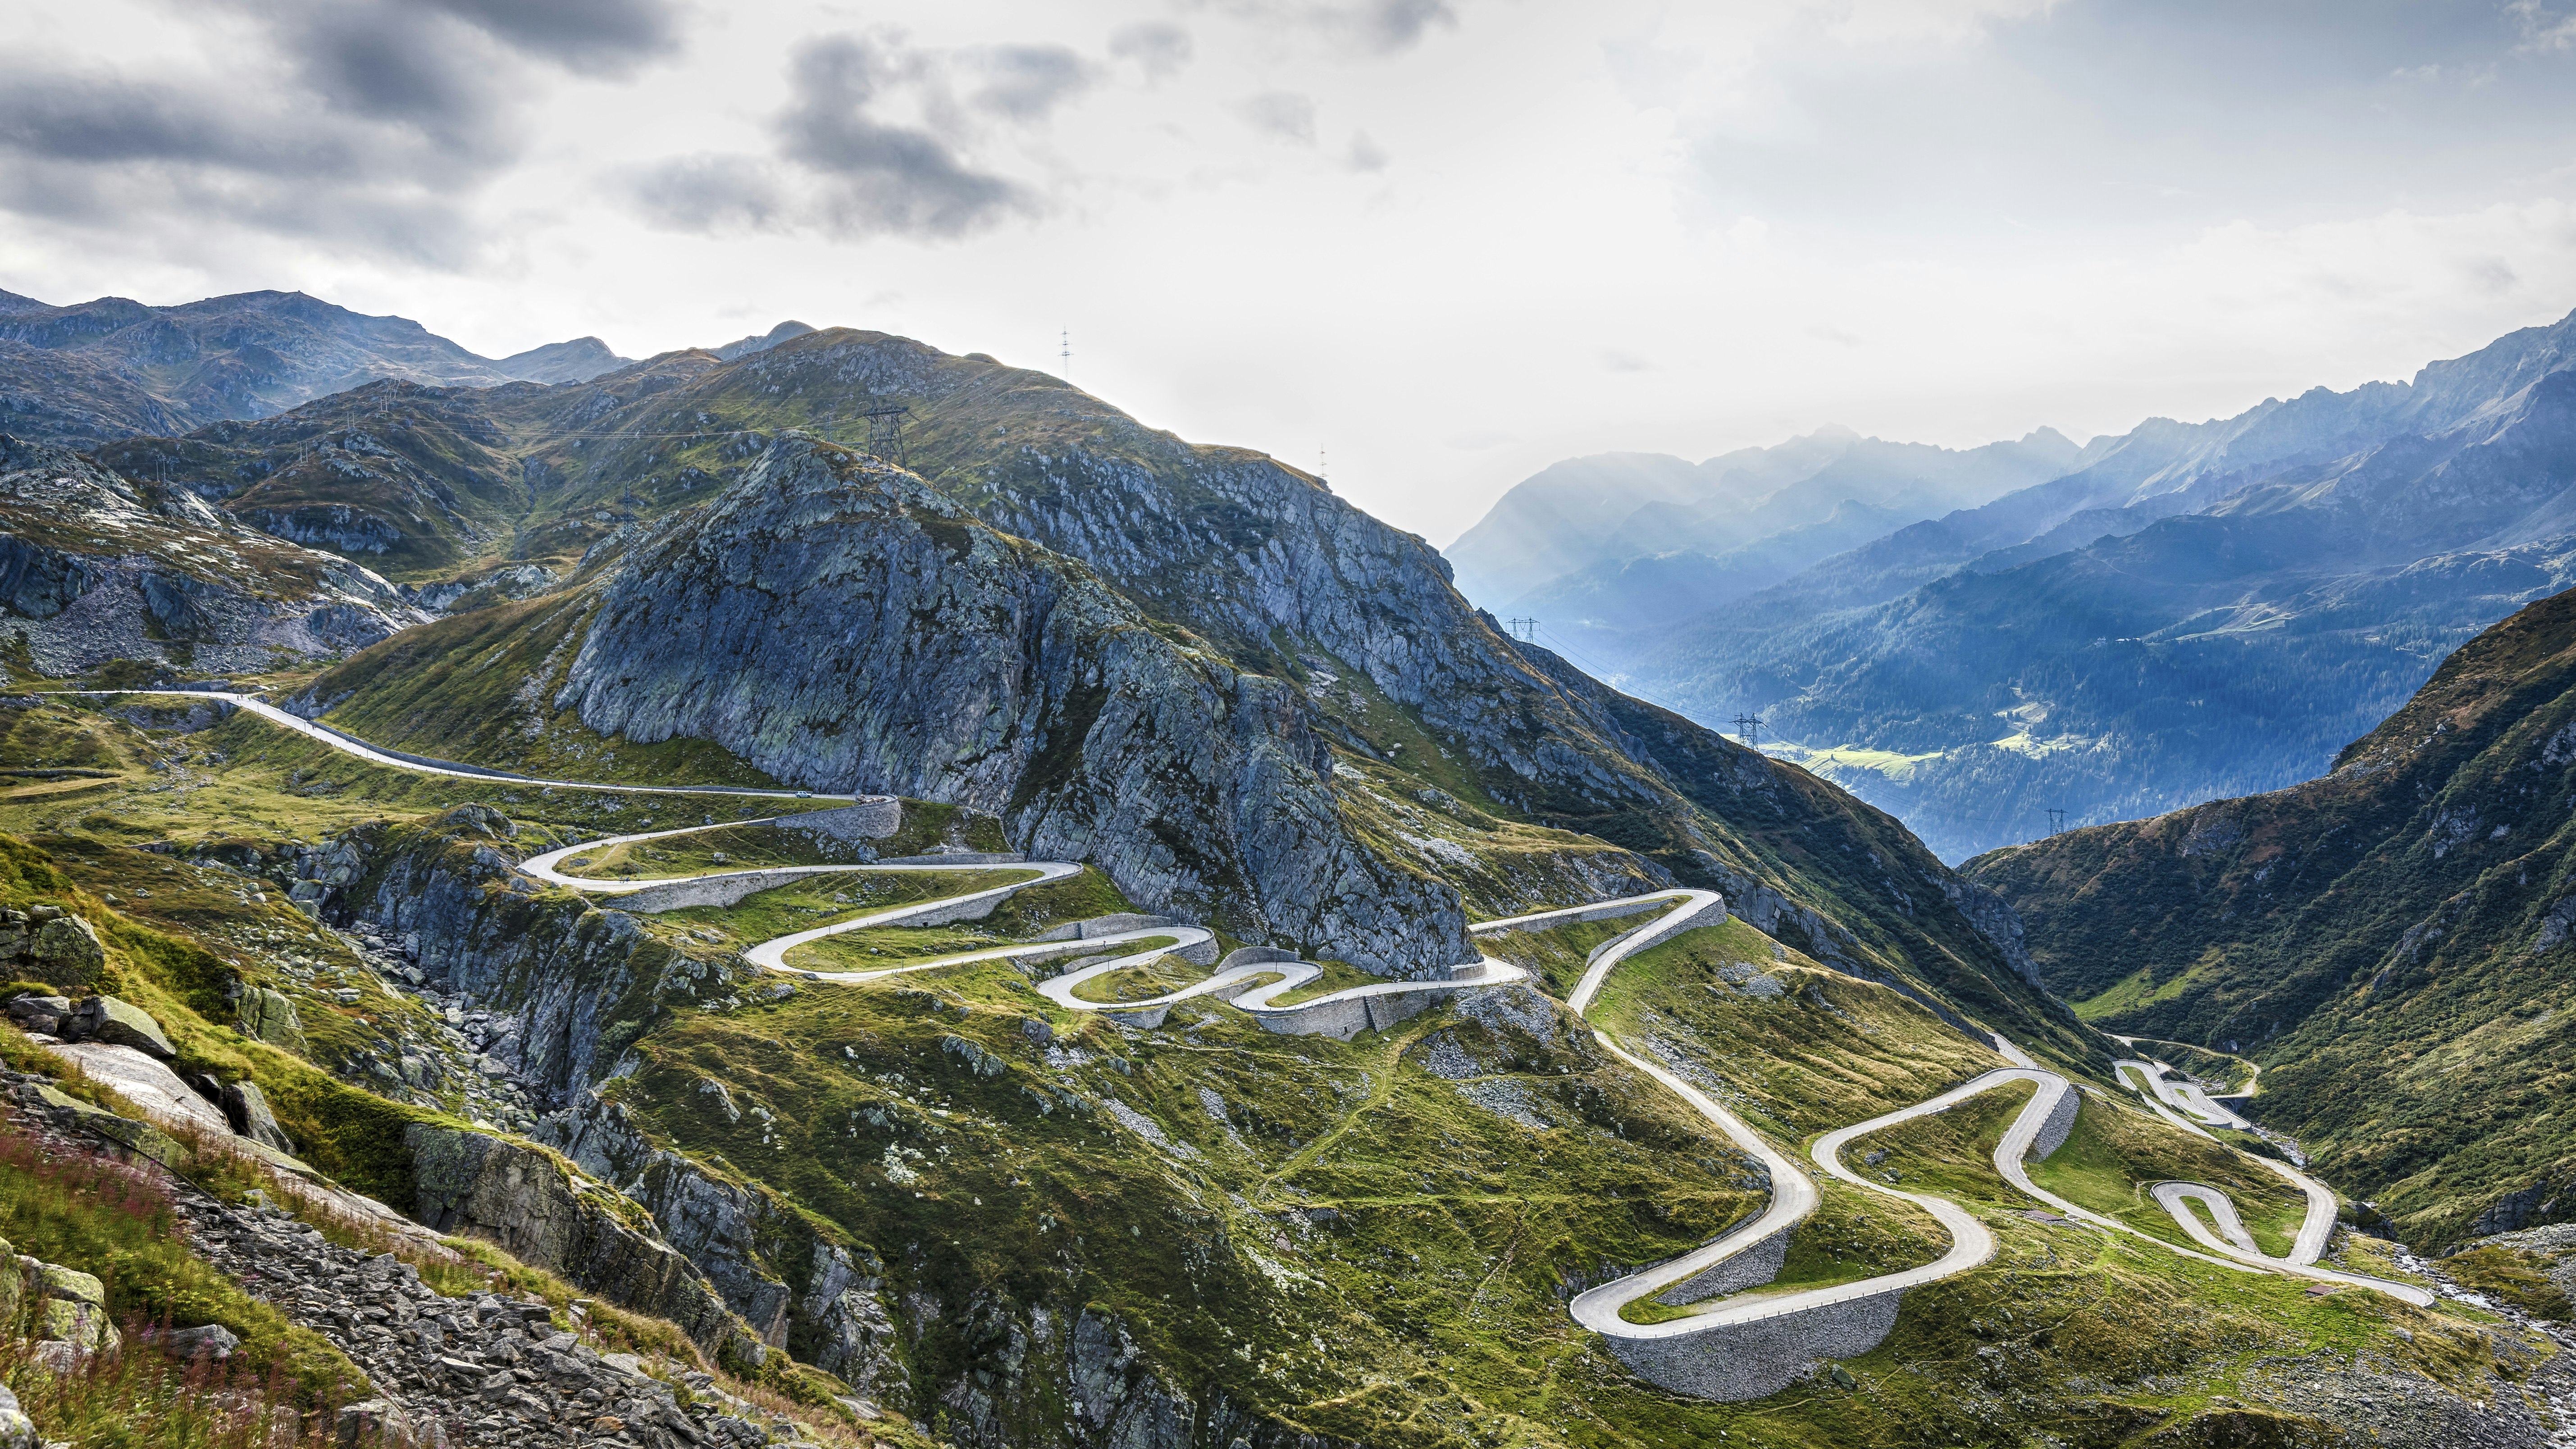 The Gotthard Pass weaves down a mountain in Switzerland, with many switchbacks